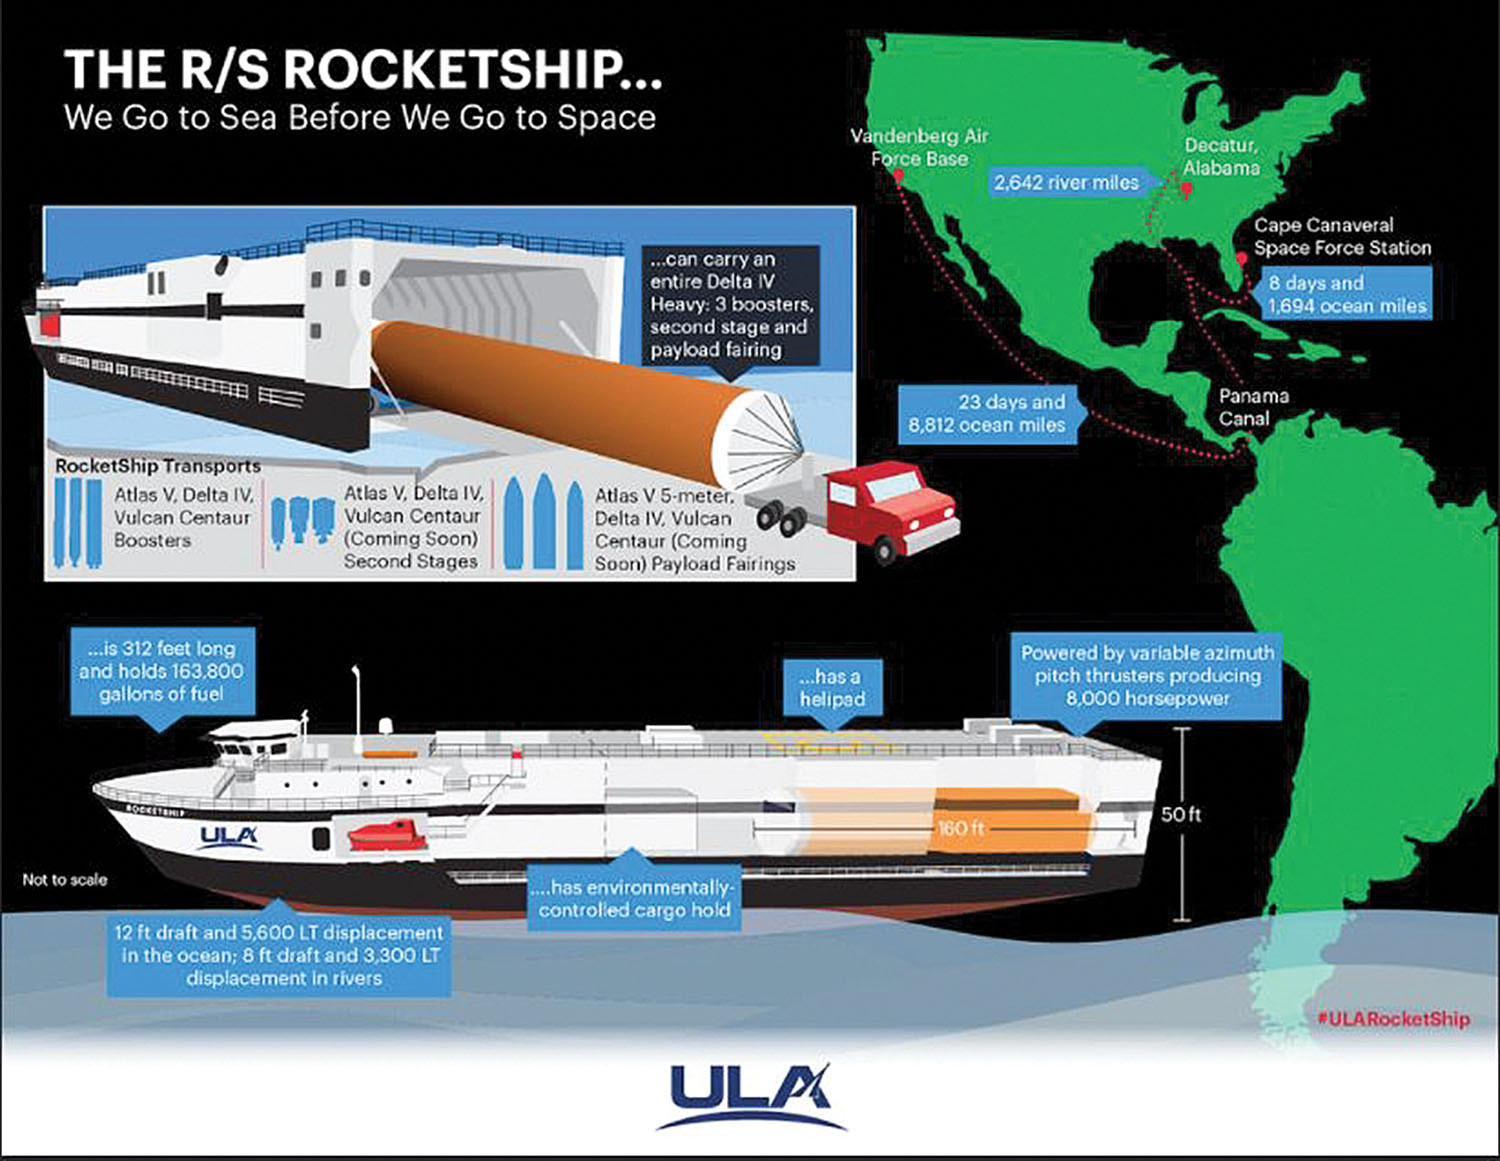 A graphic shows information about ULA’s R/S RocketShip, which delivers rockets from where they are manufactured at ULA’s facility in Decatur, Ala., to launch sites in Florida and California via the inland river system and the Gulf of Mexico. (Graphic courtesy of United Launch Alliance)